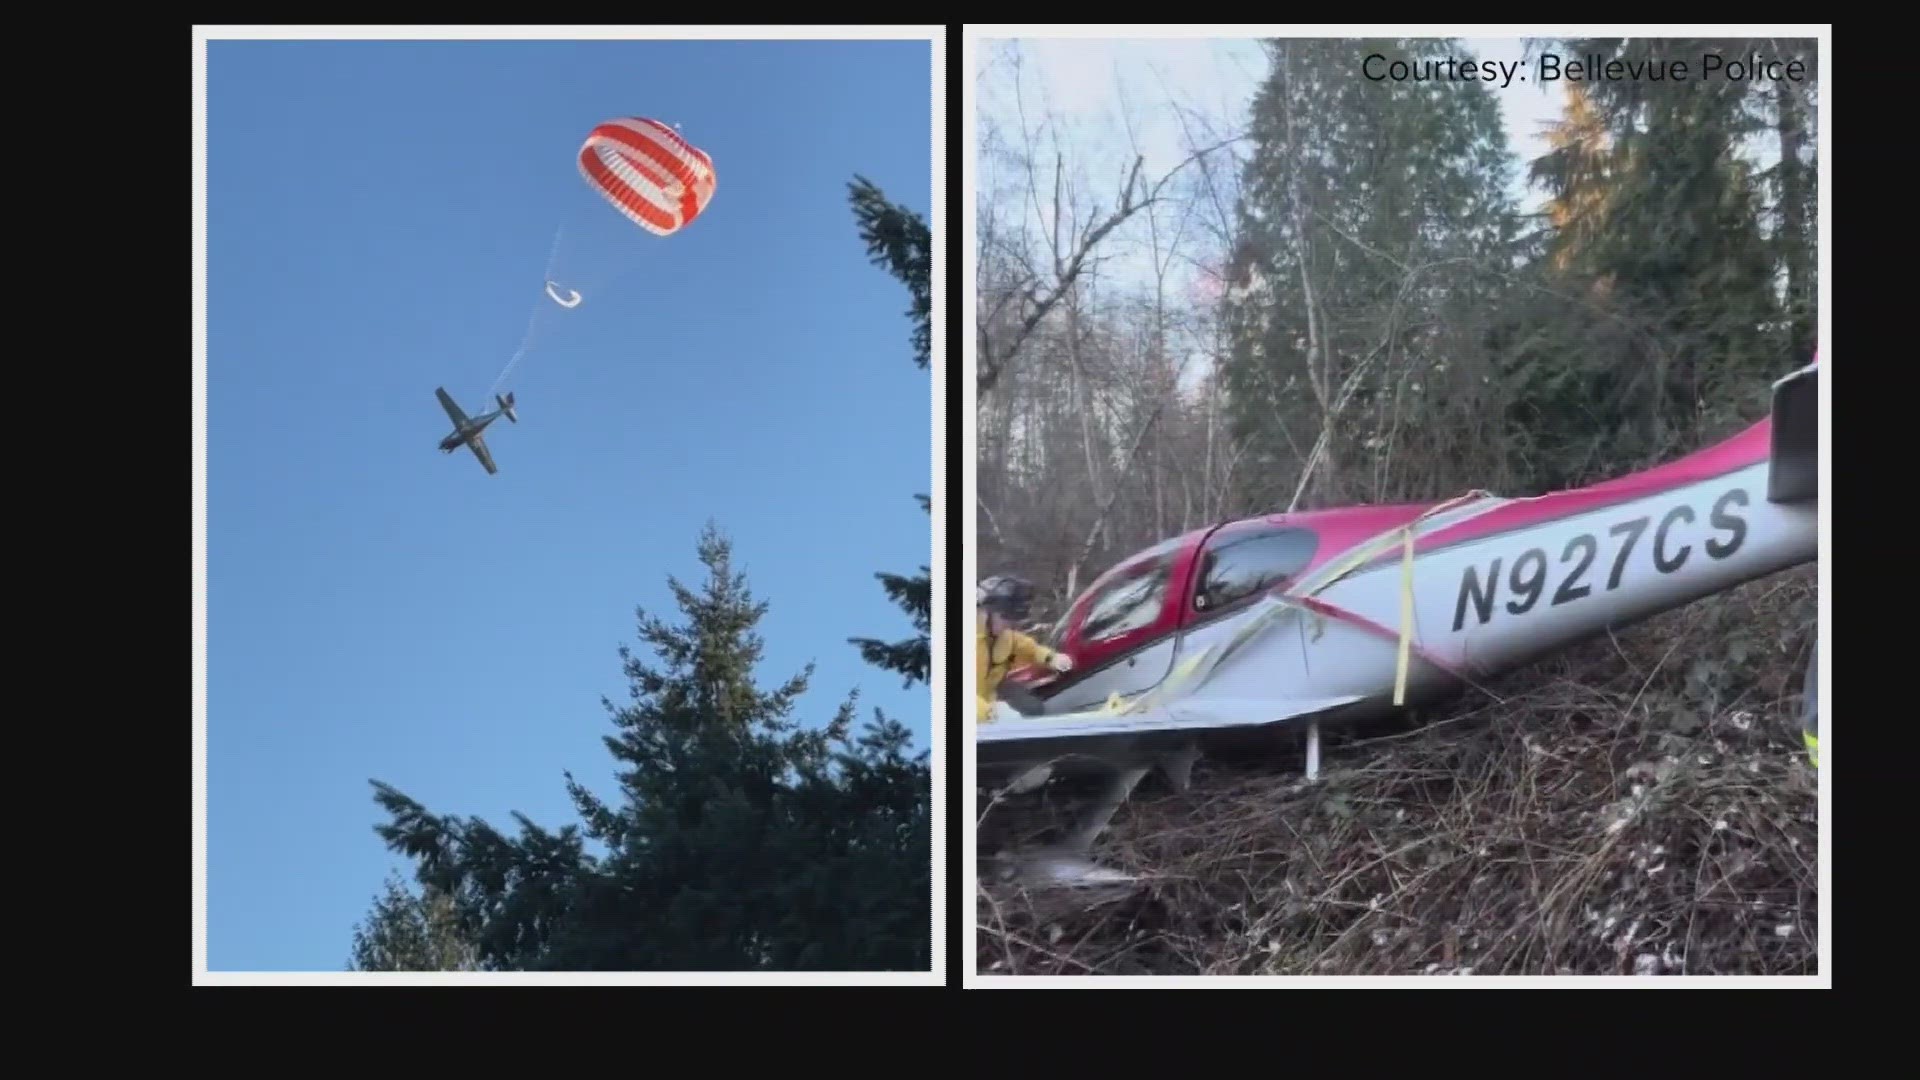 The plane ended up in a wooded area near the Olympic Pipeline Trail. No injures were reported.